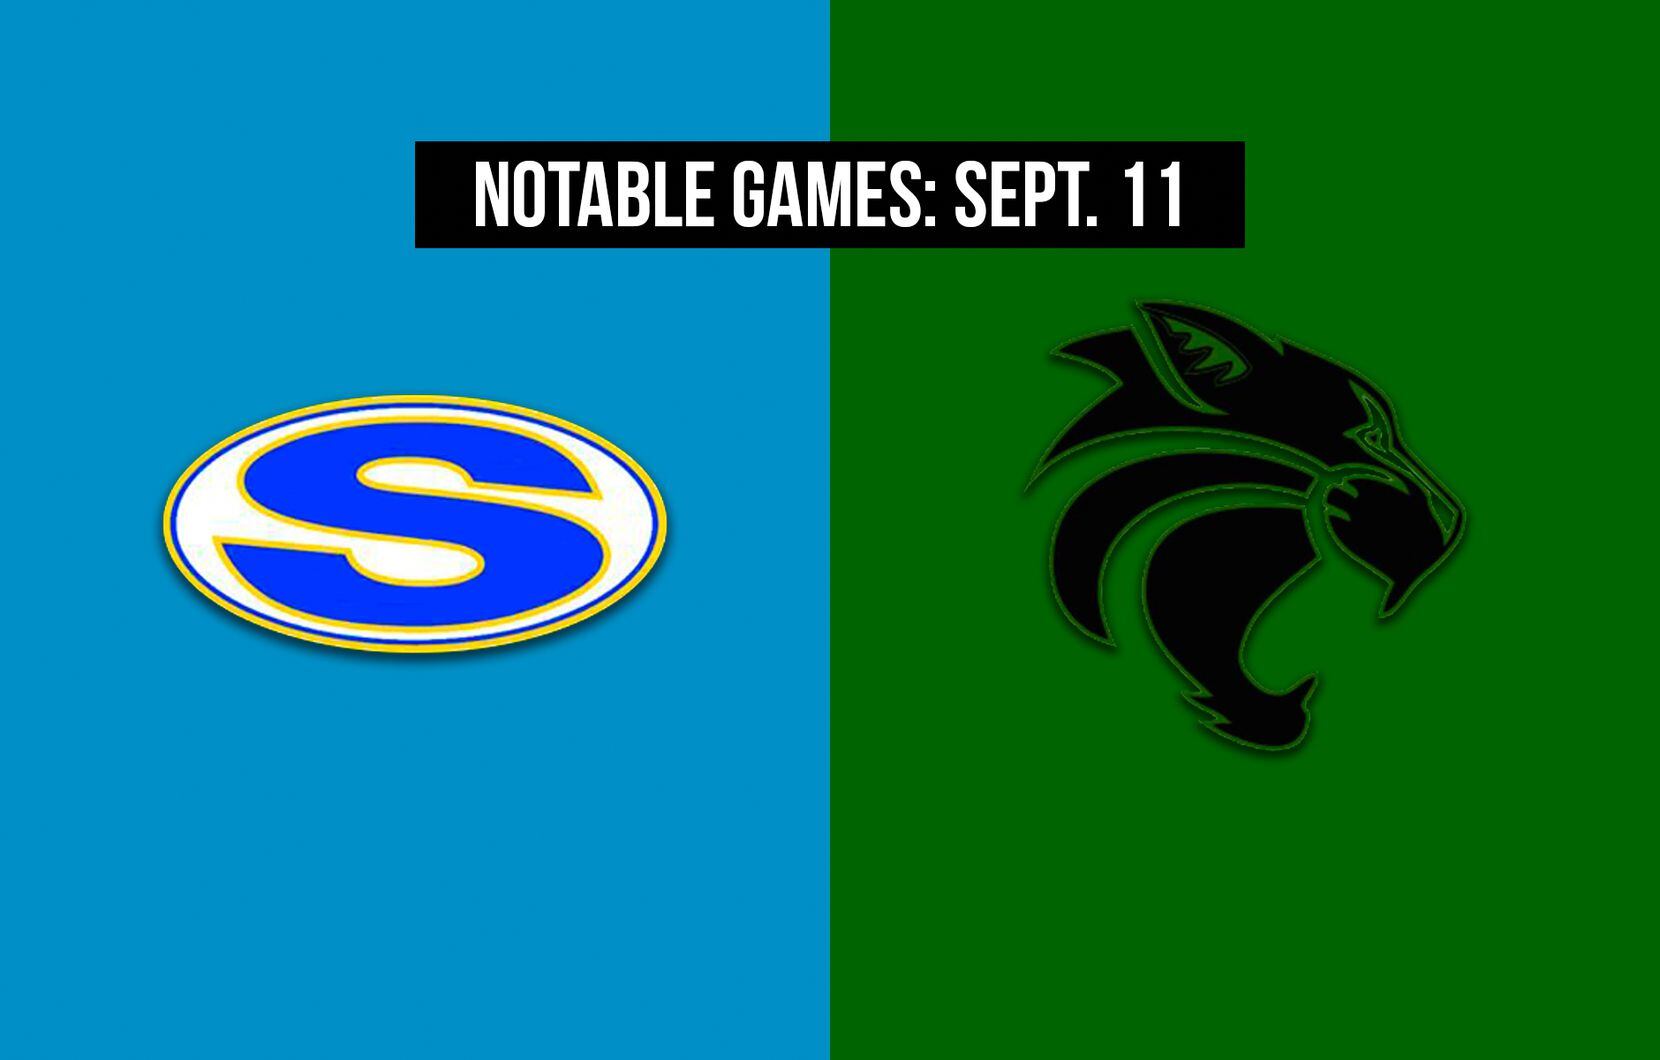 Notable games for the week of Sept. 11 of the 2020 season: Sunnyvale vs. Kennedale.